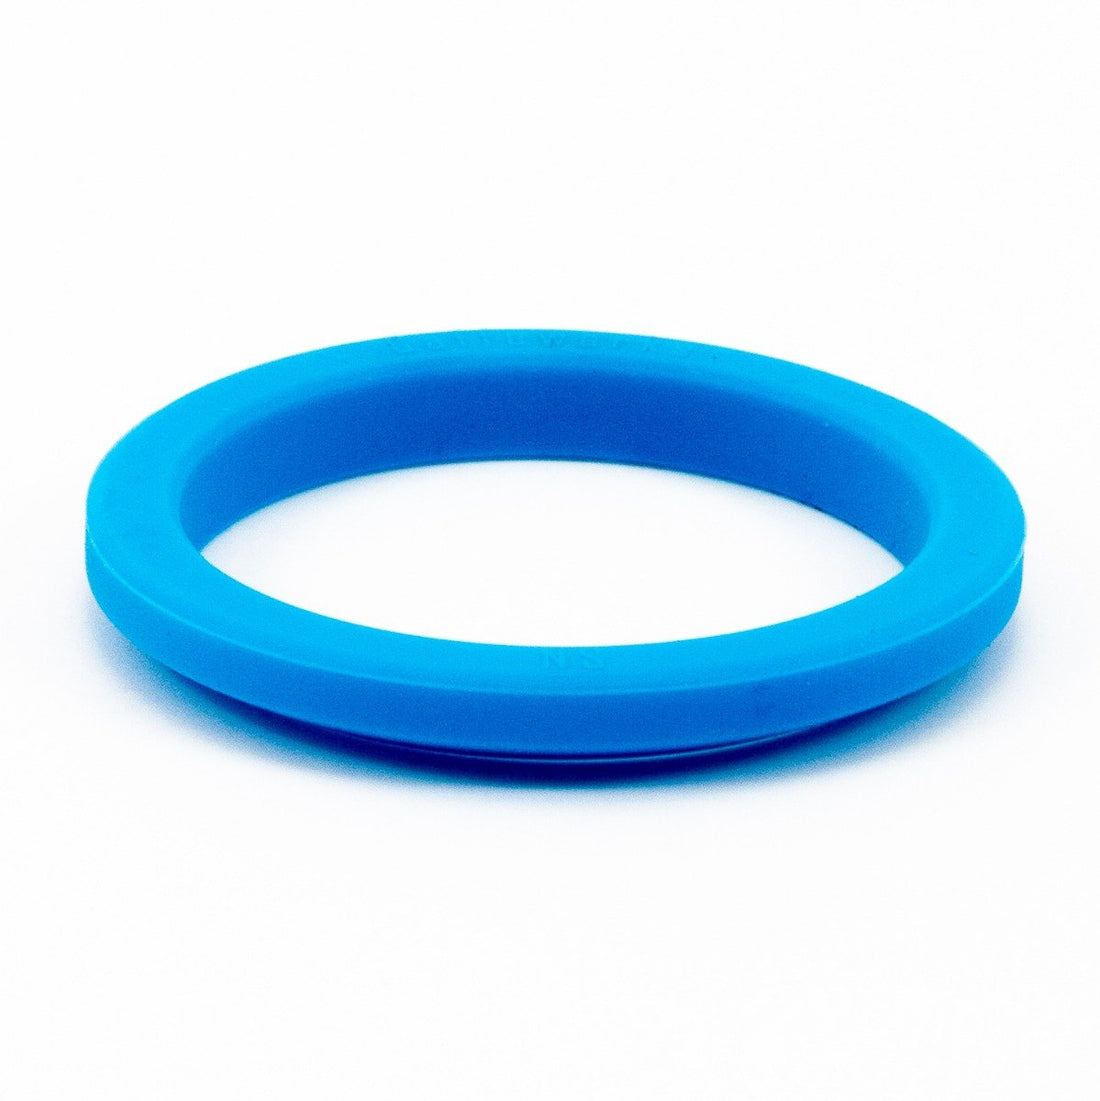 Caffewerks Silicone Group Gasket - 71 x 56 x 9mm